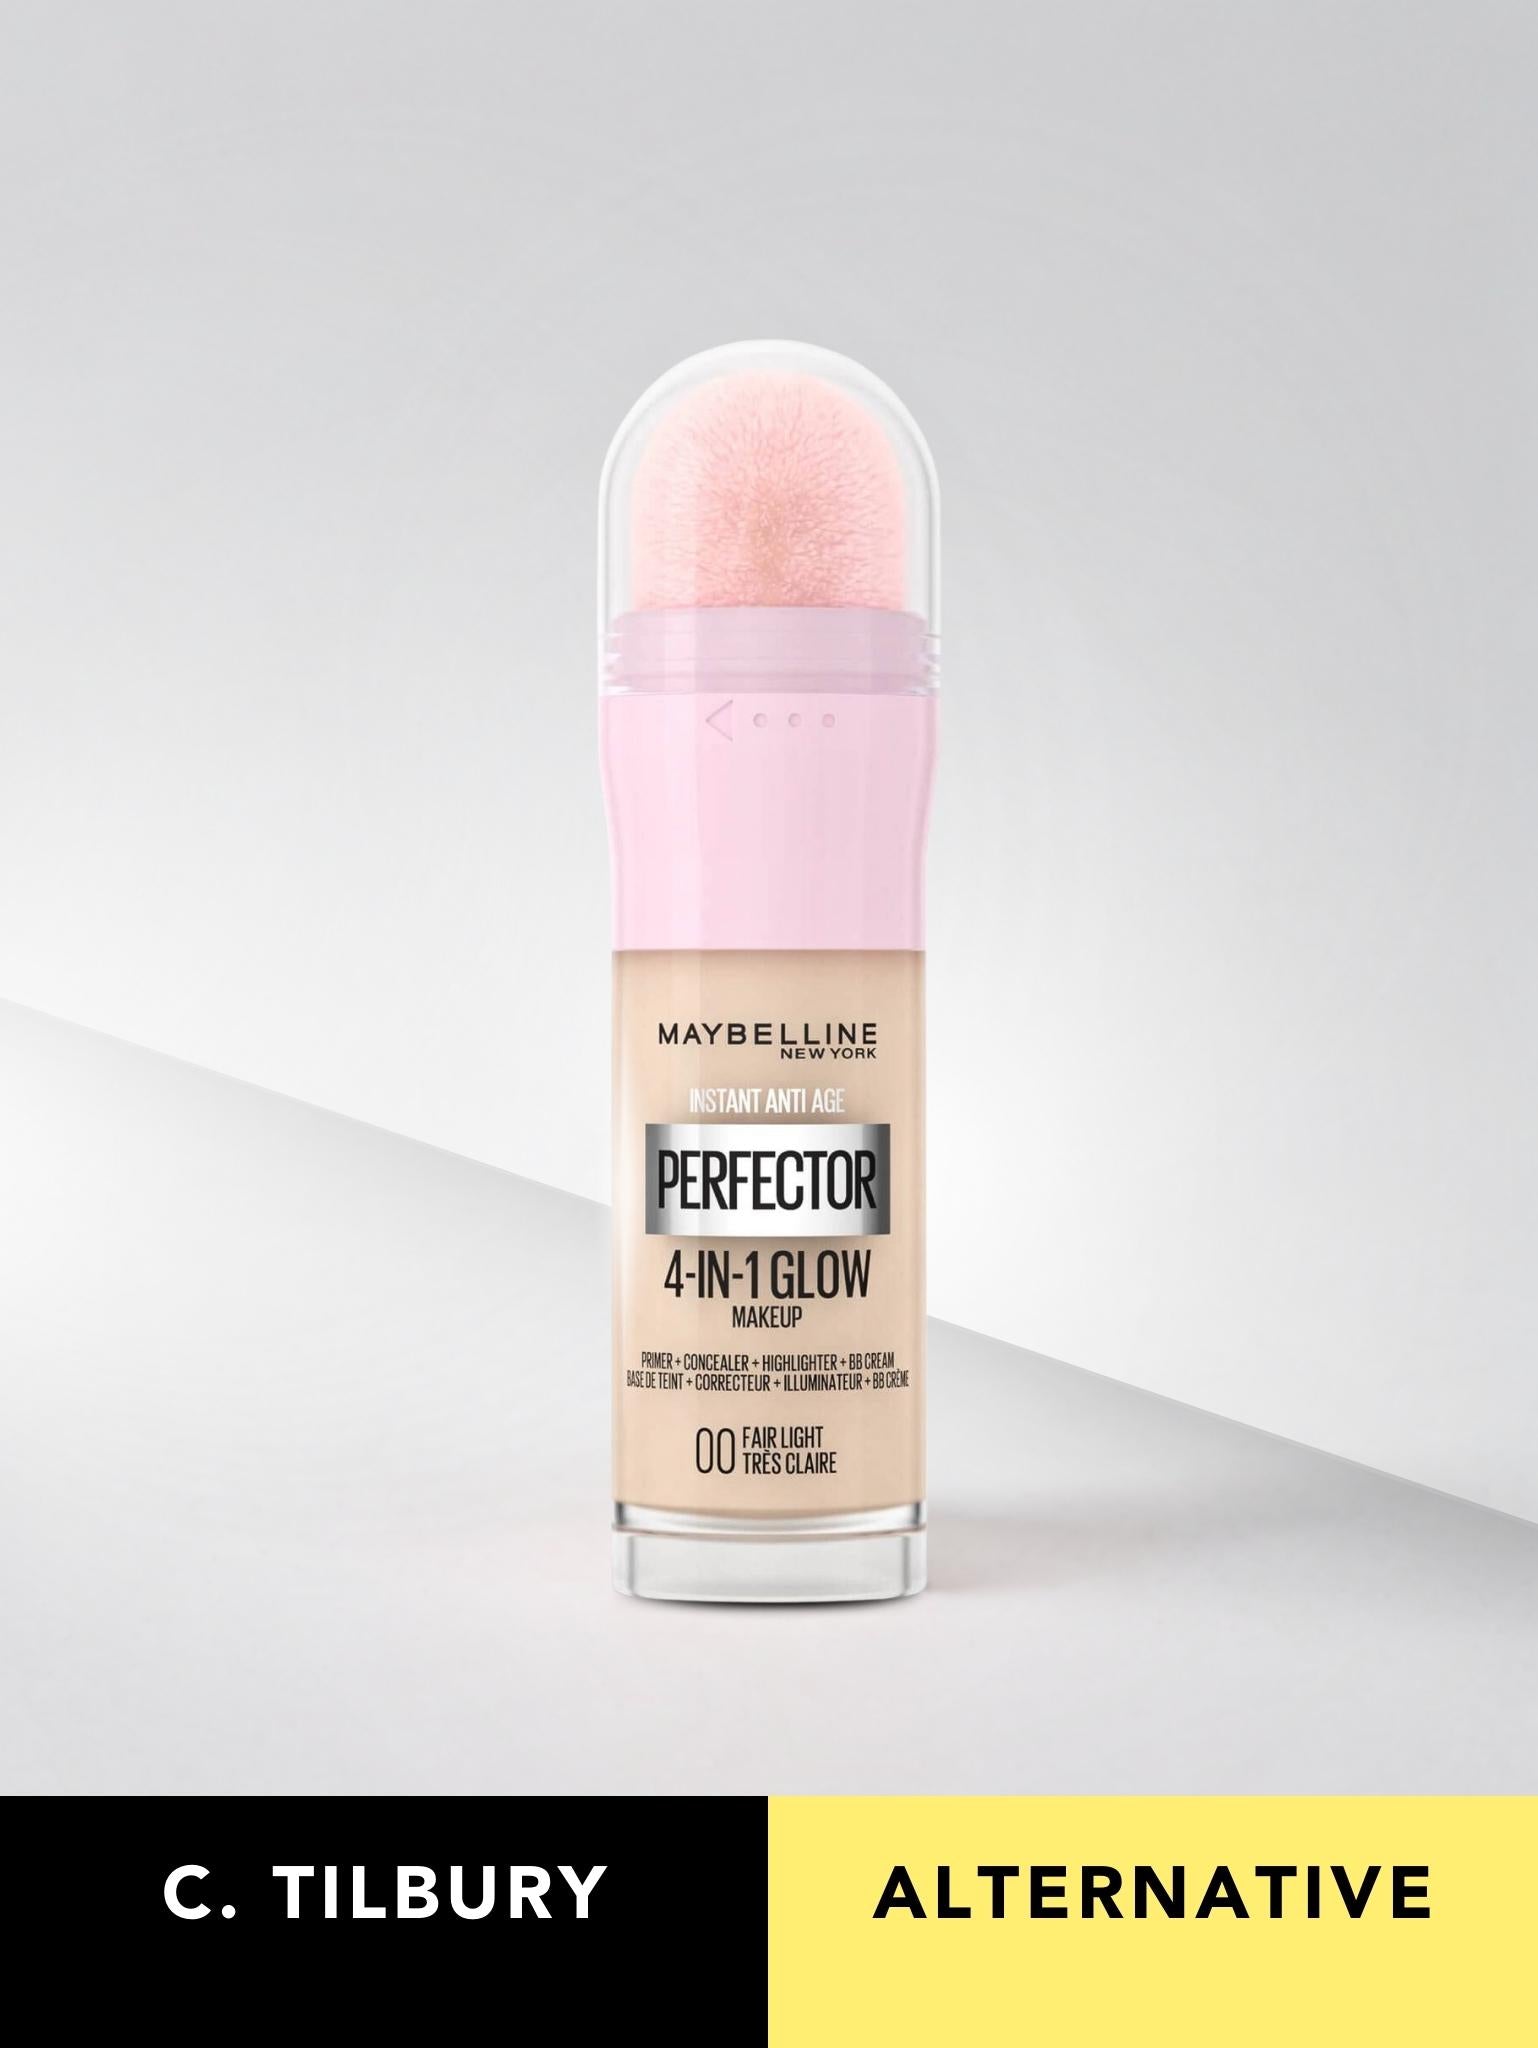 Maybelline, Instant Age Rewind, Perfector 4-in-1 Glow Makeup, 01 Light